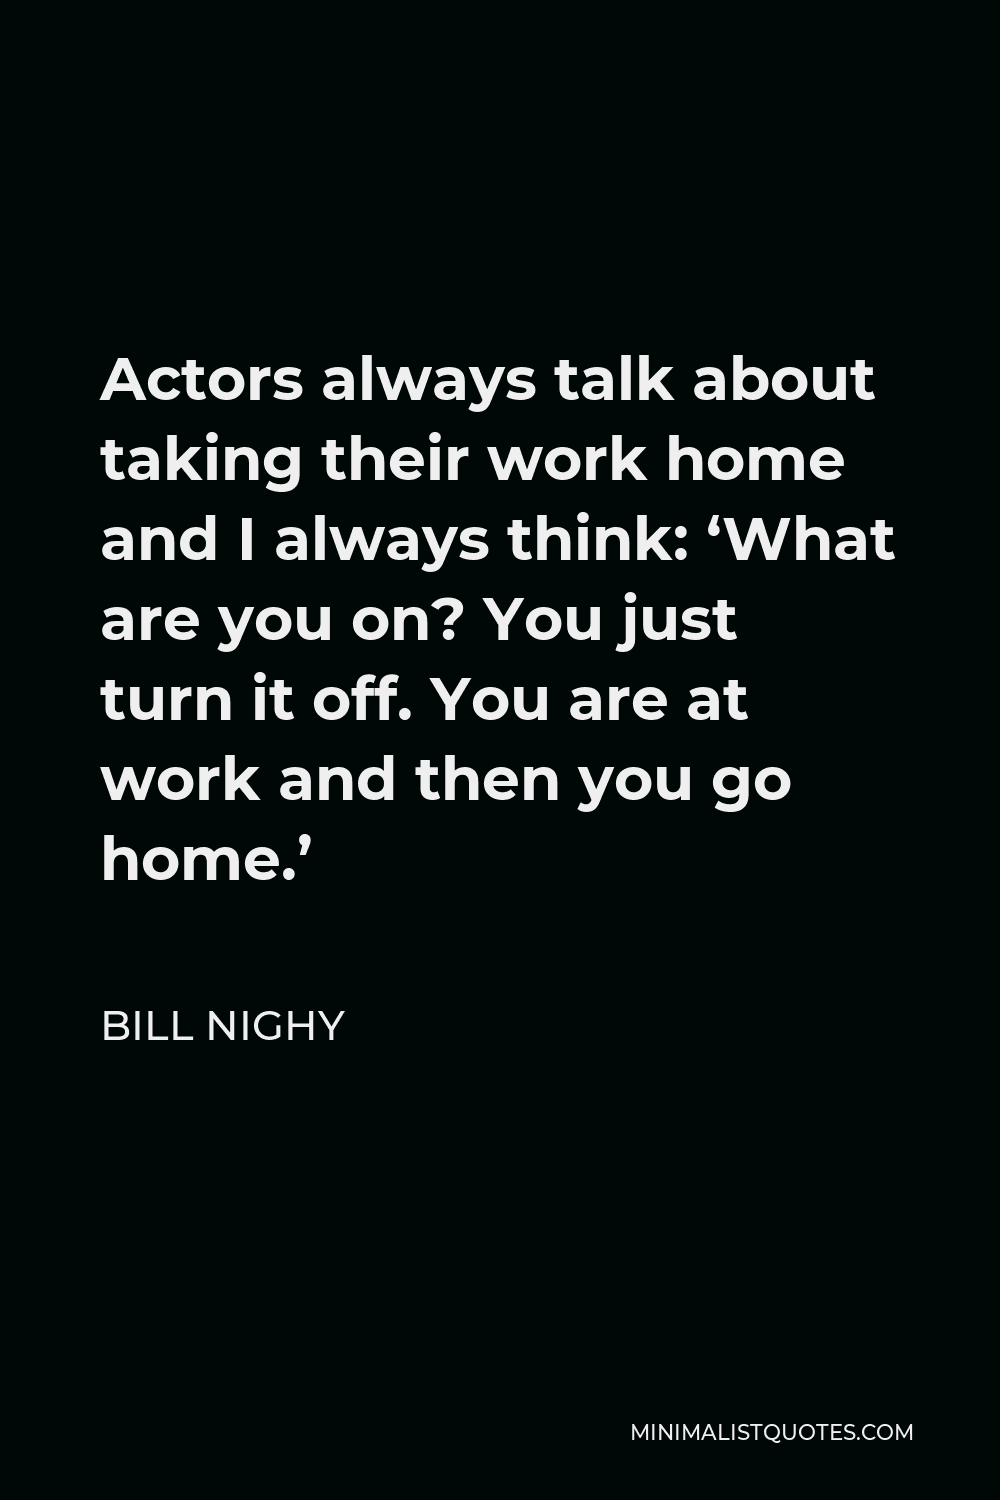 Bill Nighy Quote - Actors always talk about taking their work home and I always think: ‘What are you on? You just turn it off. You are at work and then you go home.’